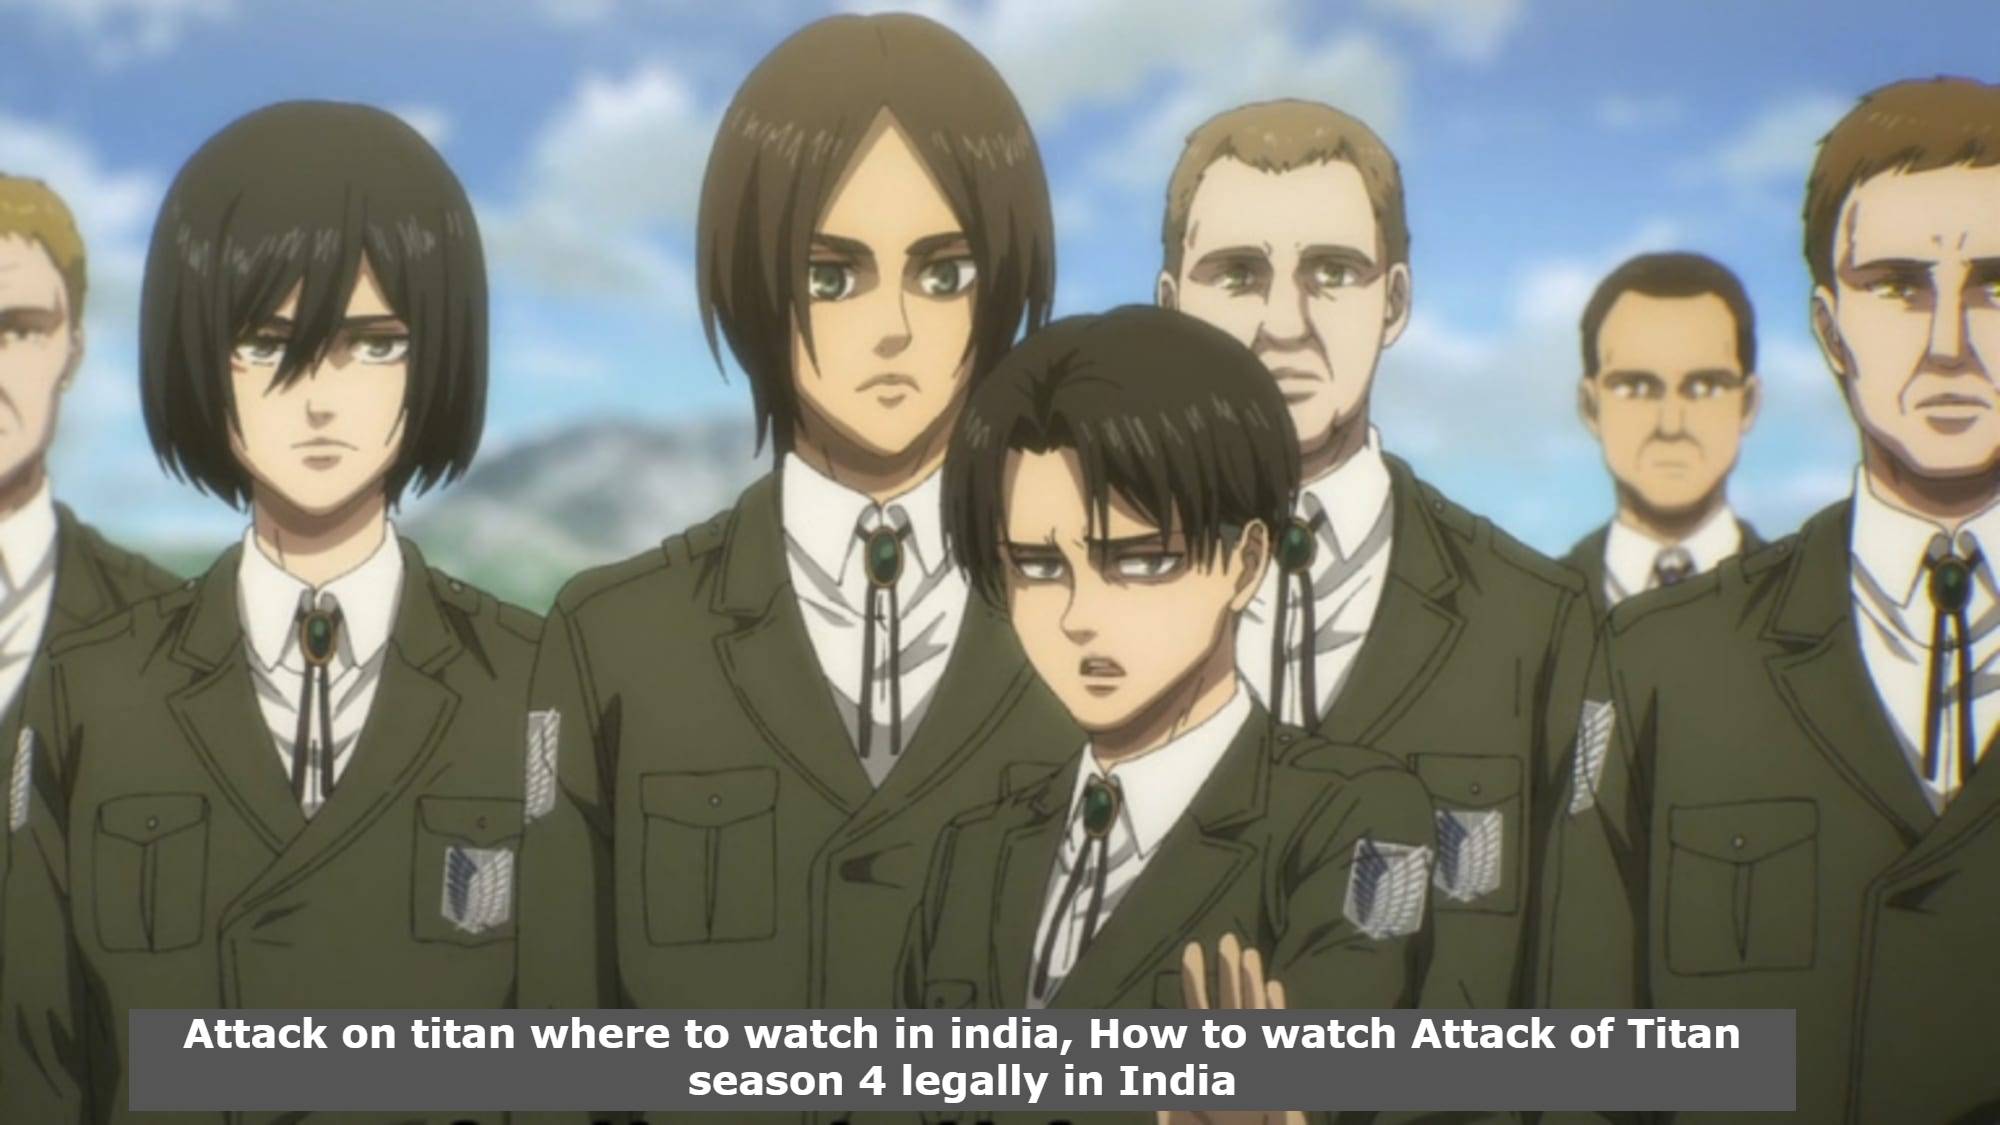 Attack on titan where to watch in india, How to watch Attack of Titan season 4 legally in India